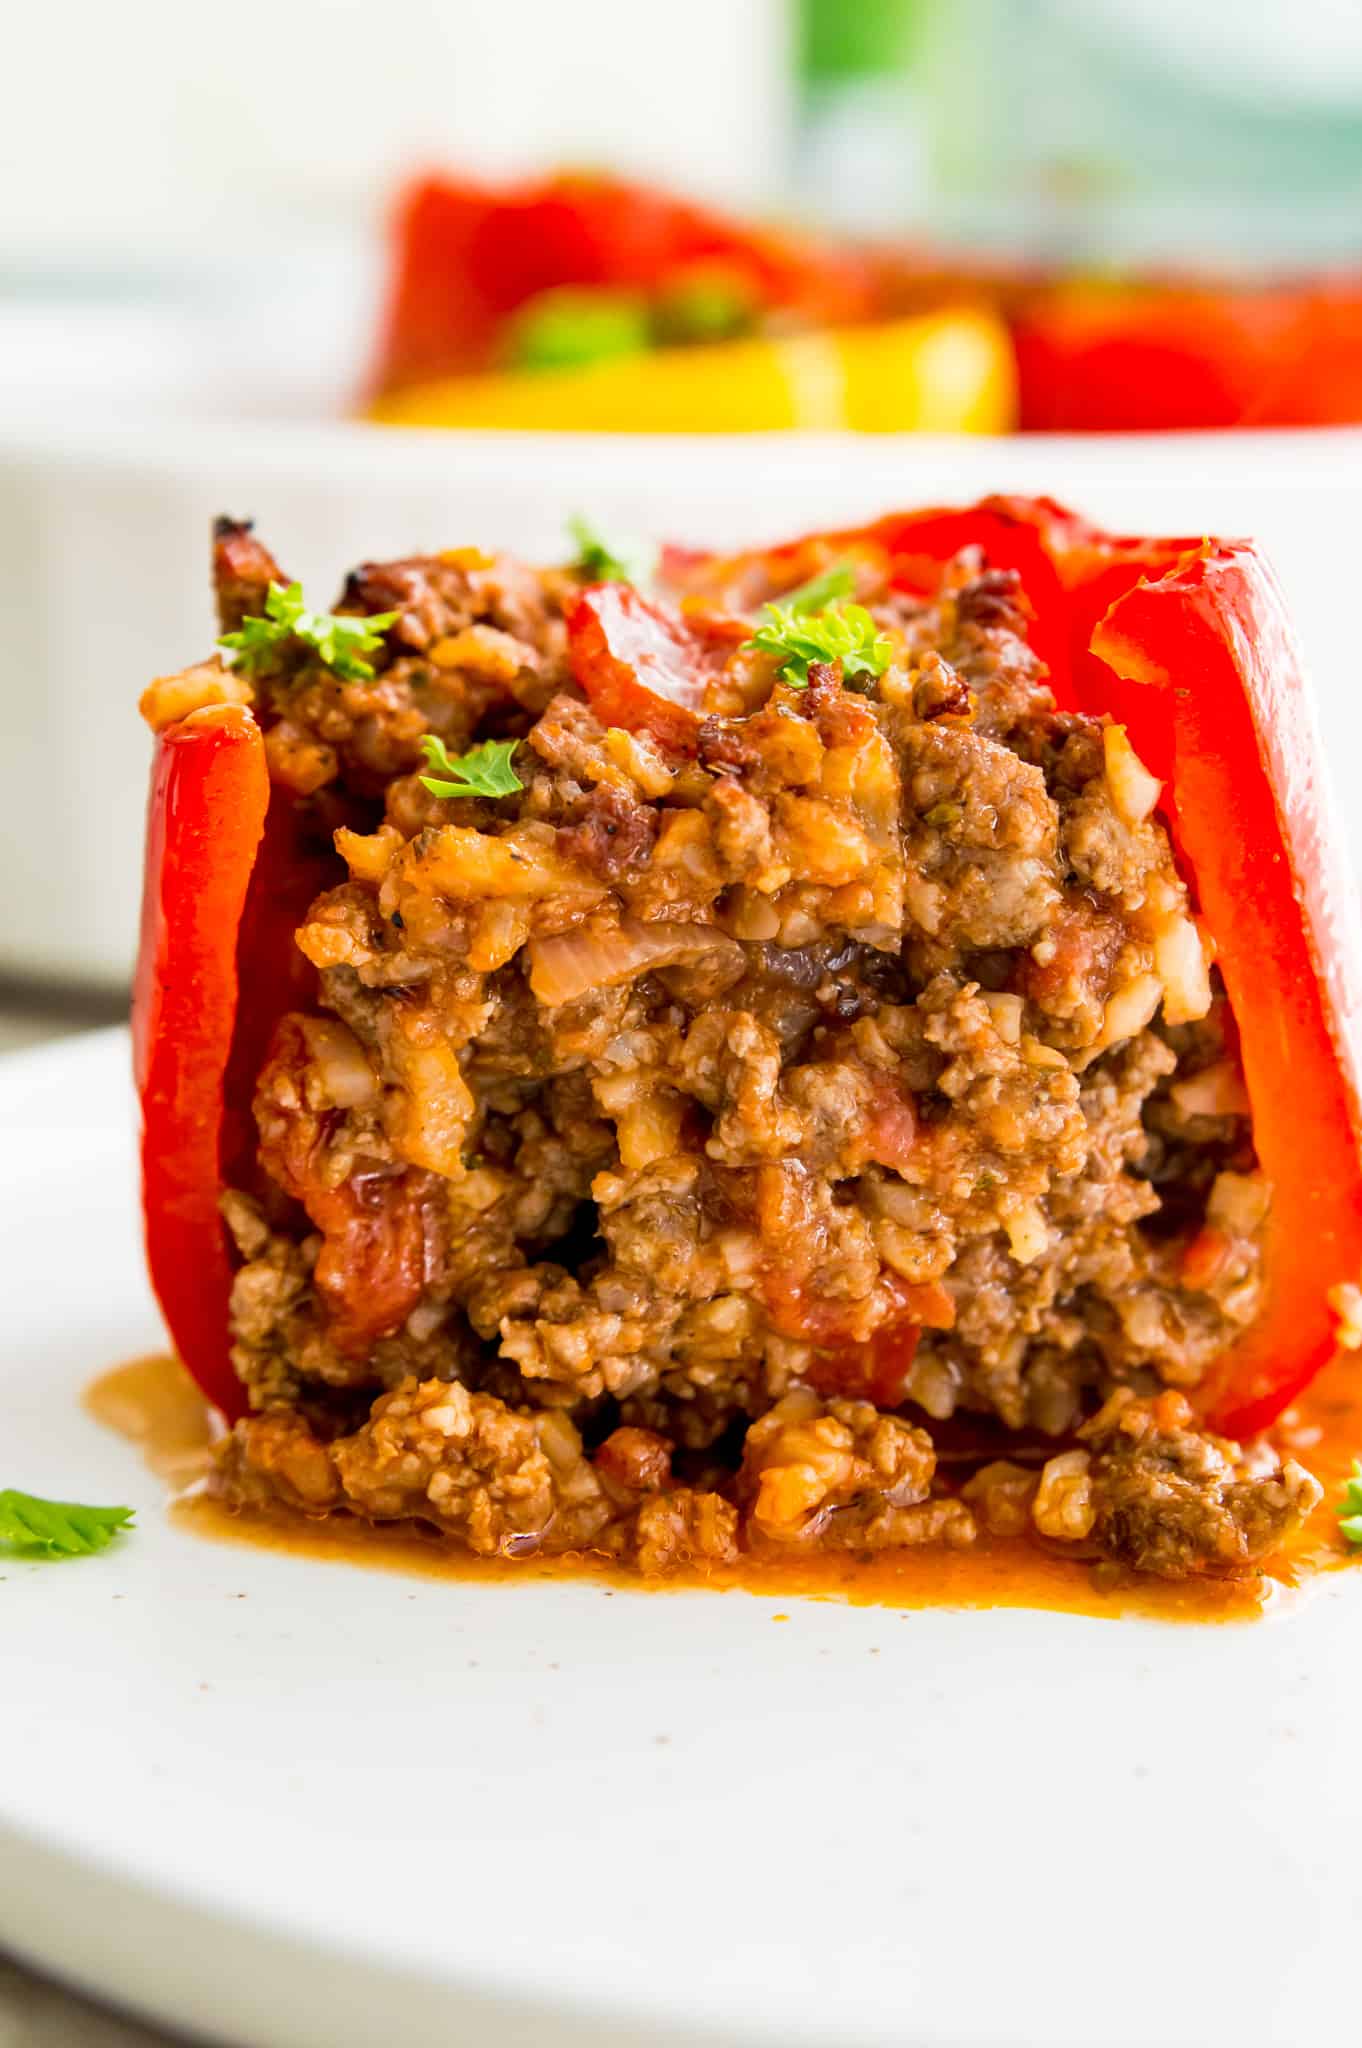 A stuffed red pepper cut in half so you can see the ground beef filling in it.